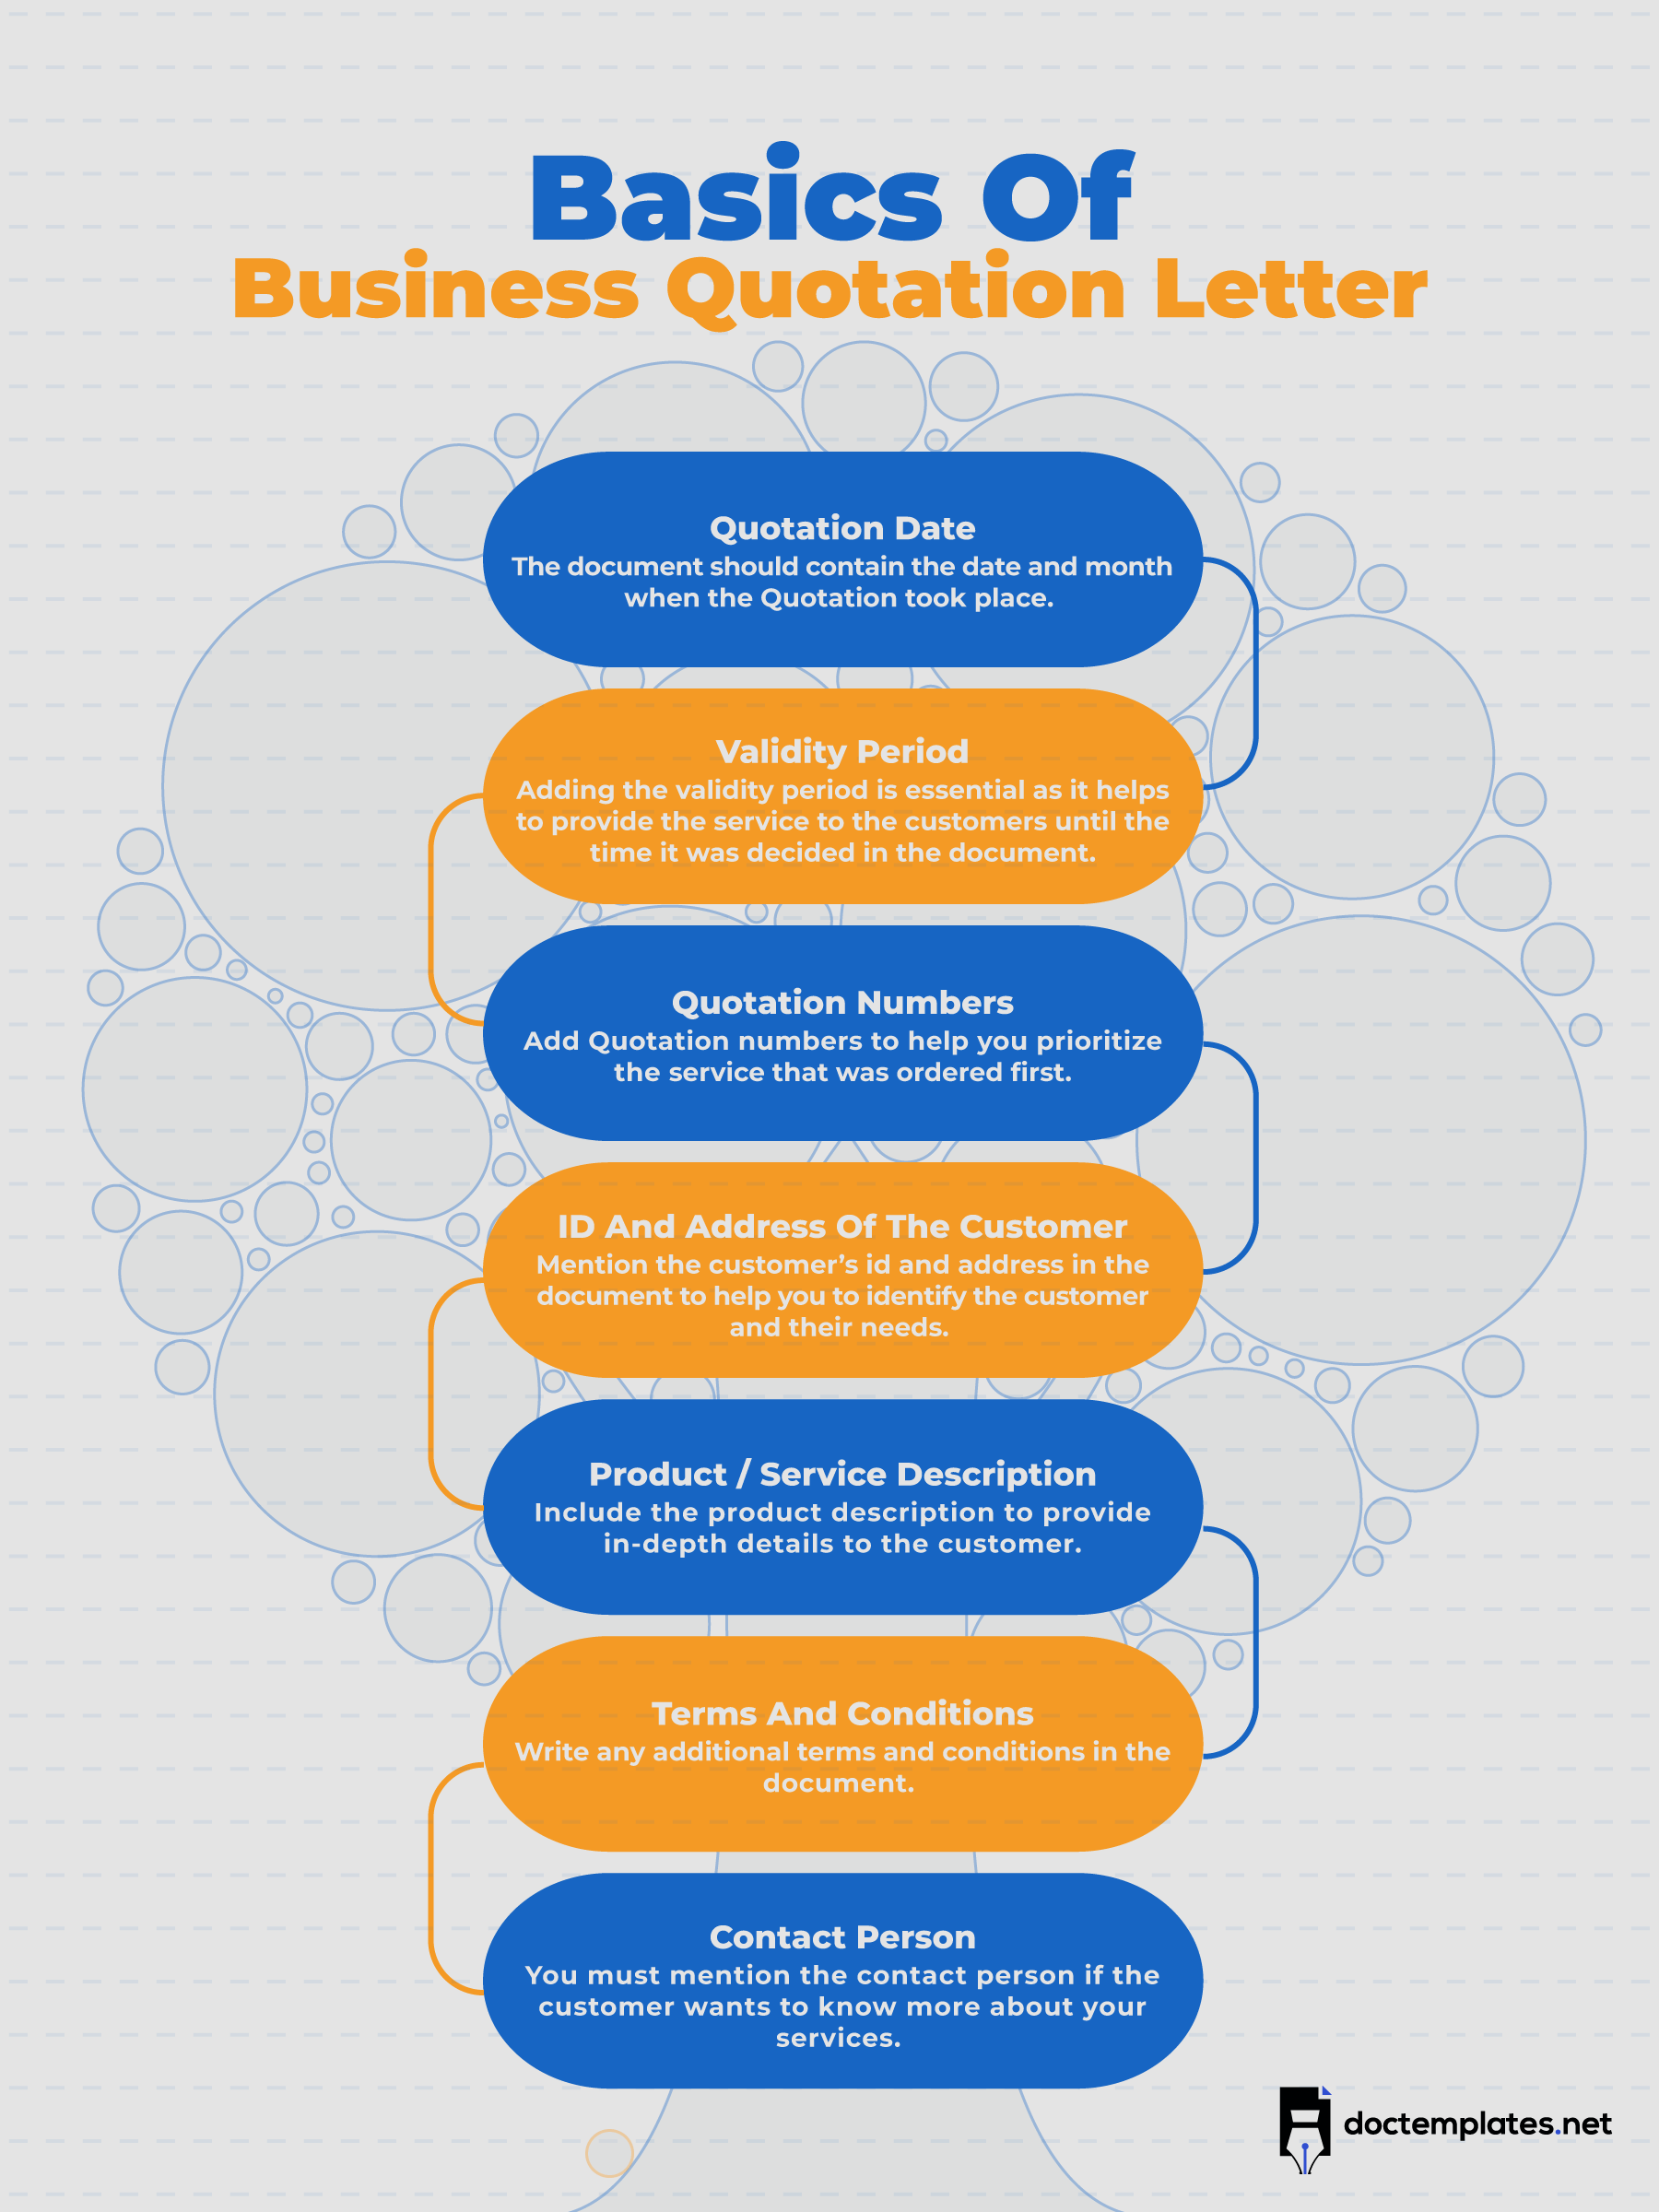 This infographic is about basics of quotation business letter.